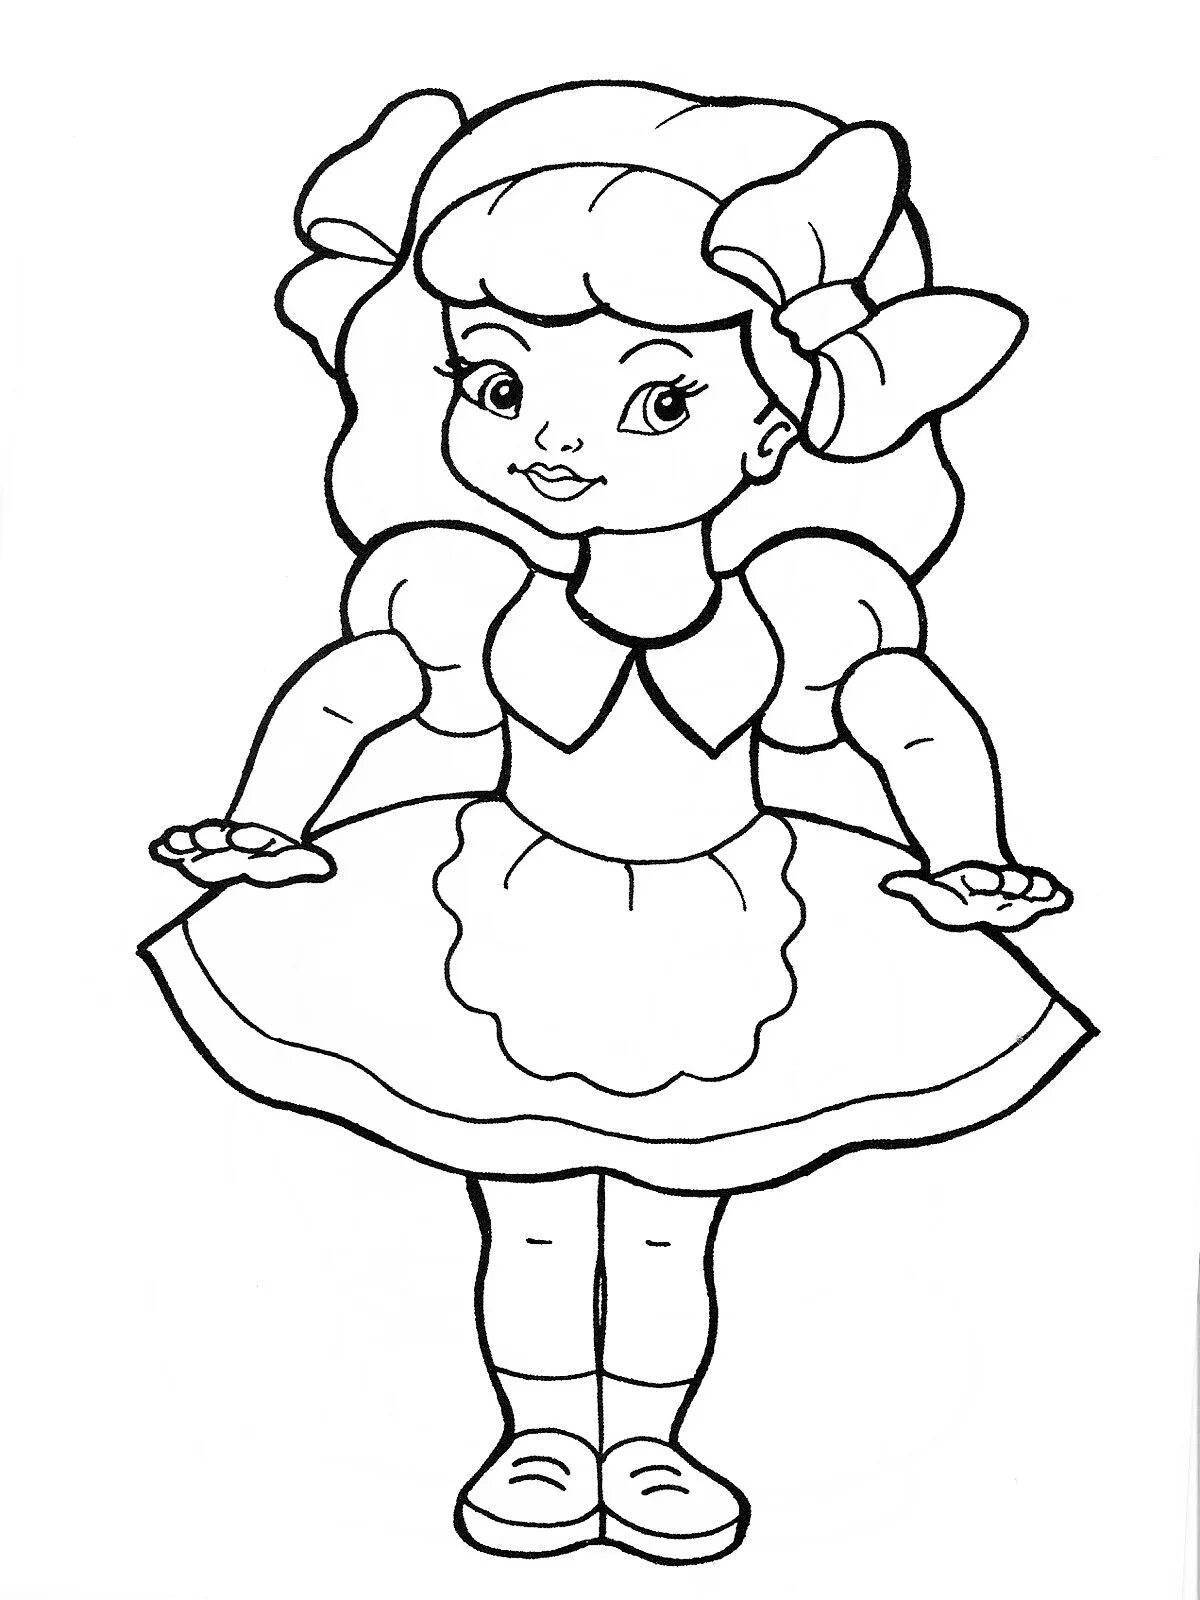 Silly coloring doll in a dress